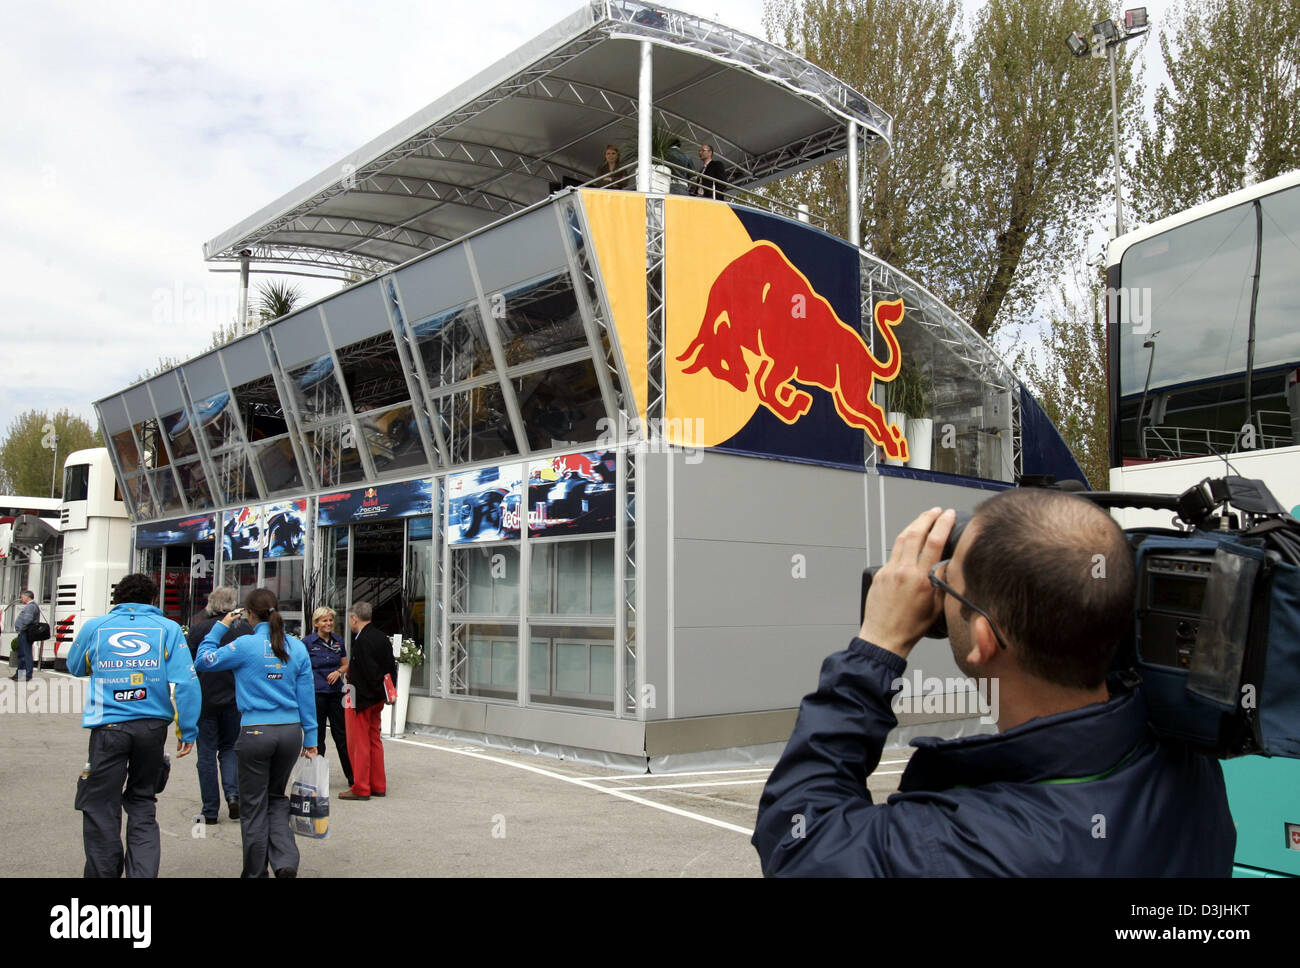 Tag ud Banquet flise dpa) - A cameraman (R) films the new hospitality of the Red Bull Racing  Team in the paddock at the formula one racetrack in Imola, Italy, Thursday  21 April 2005. The building